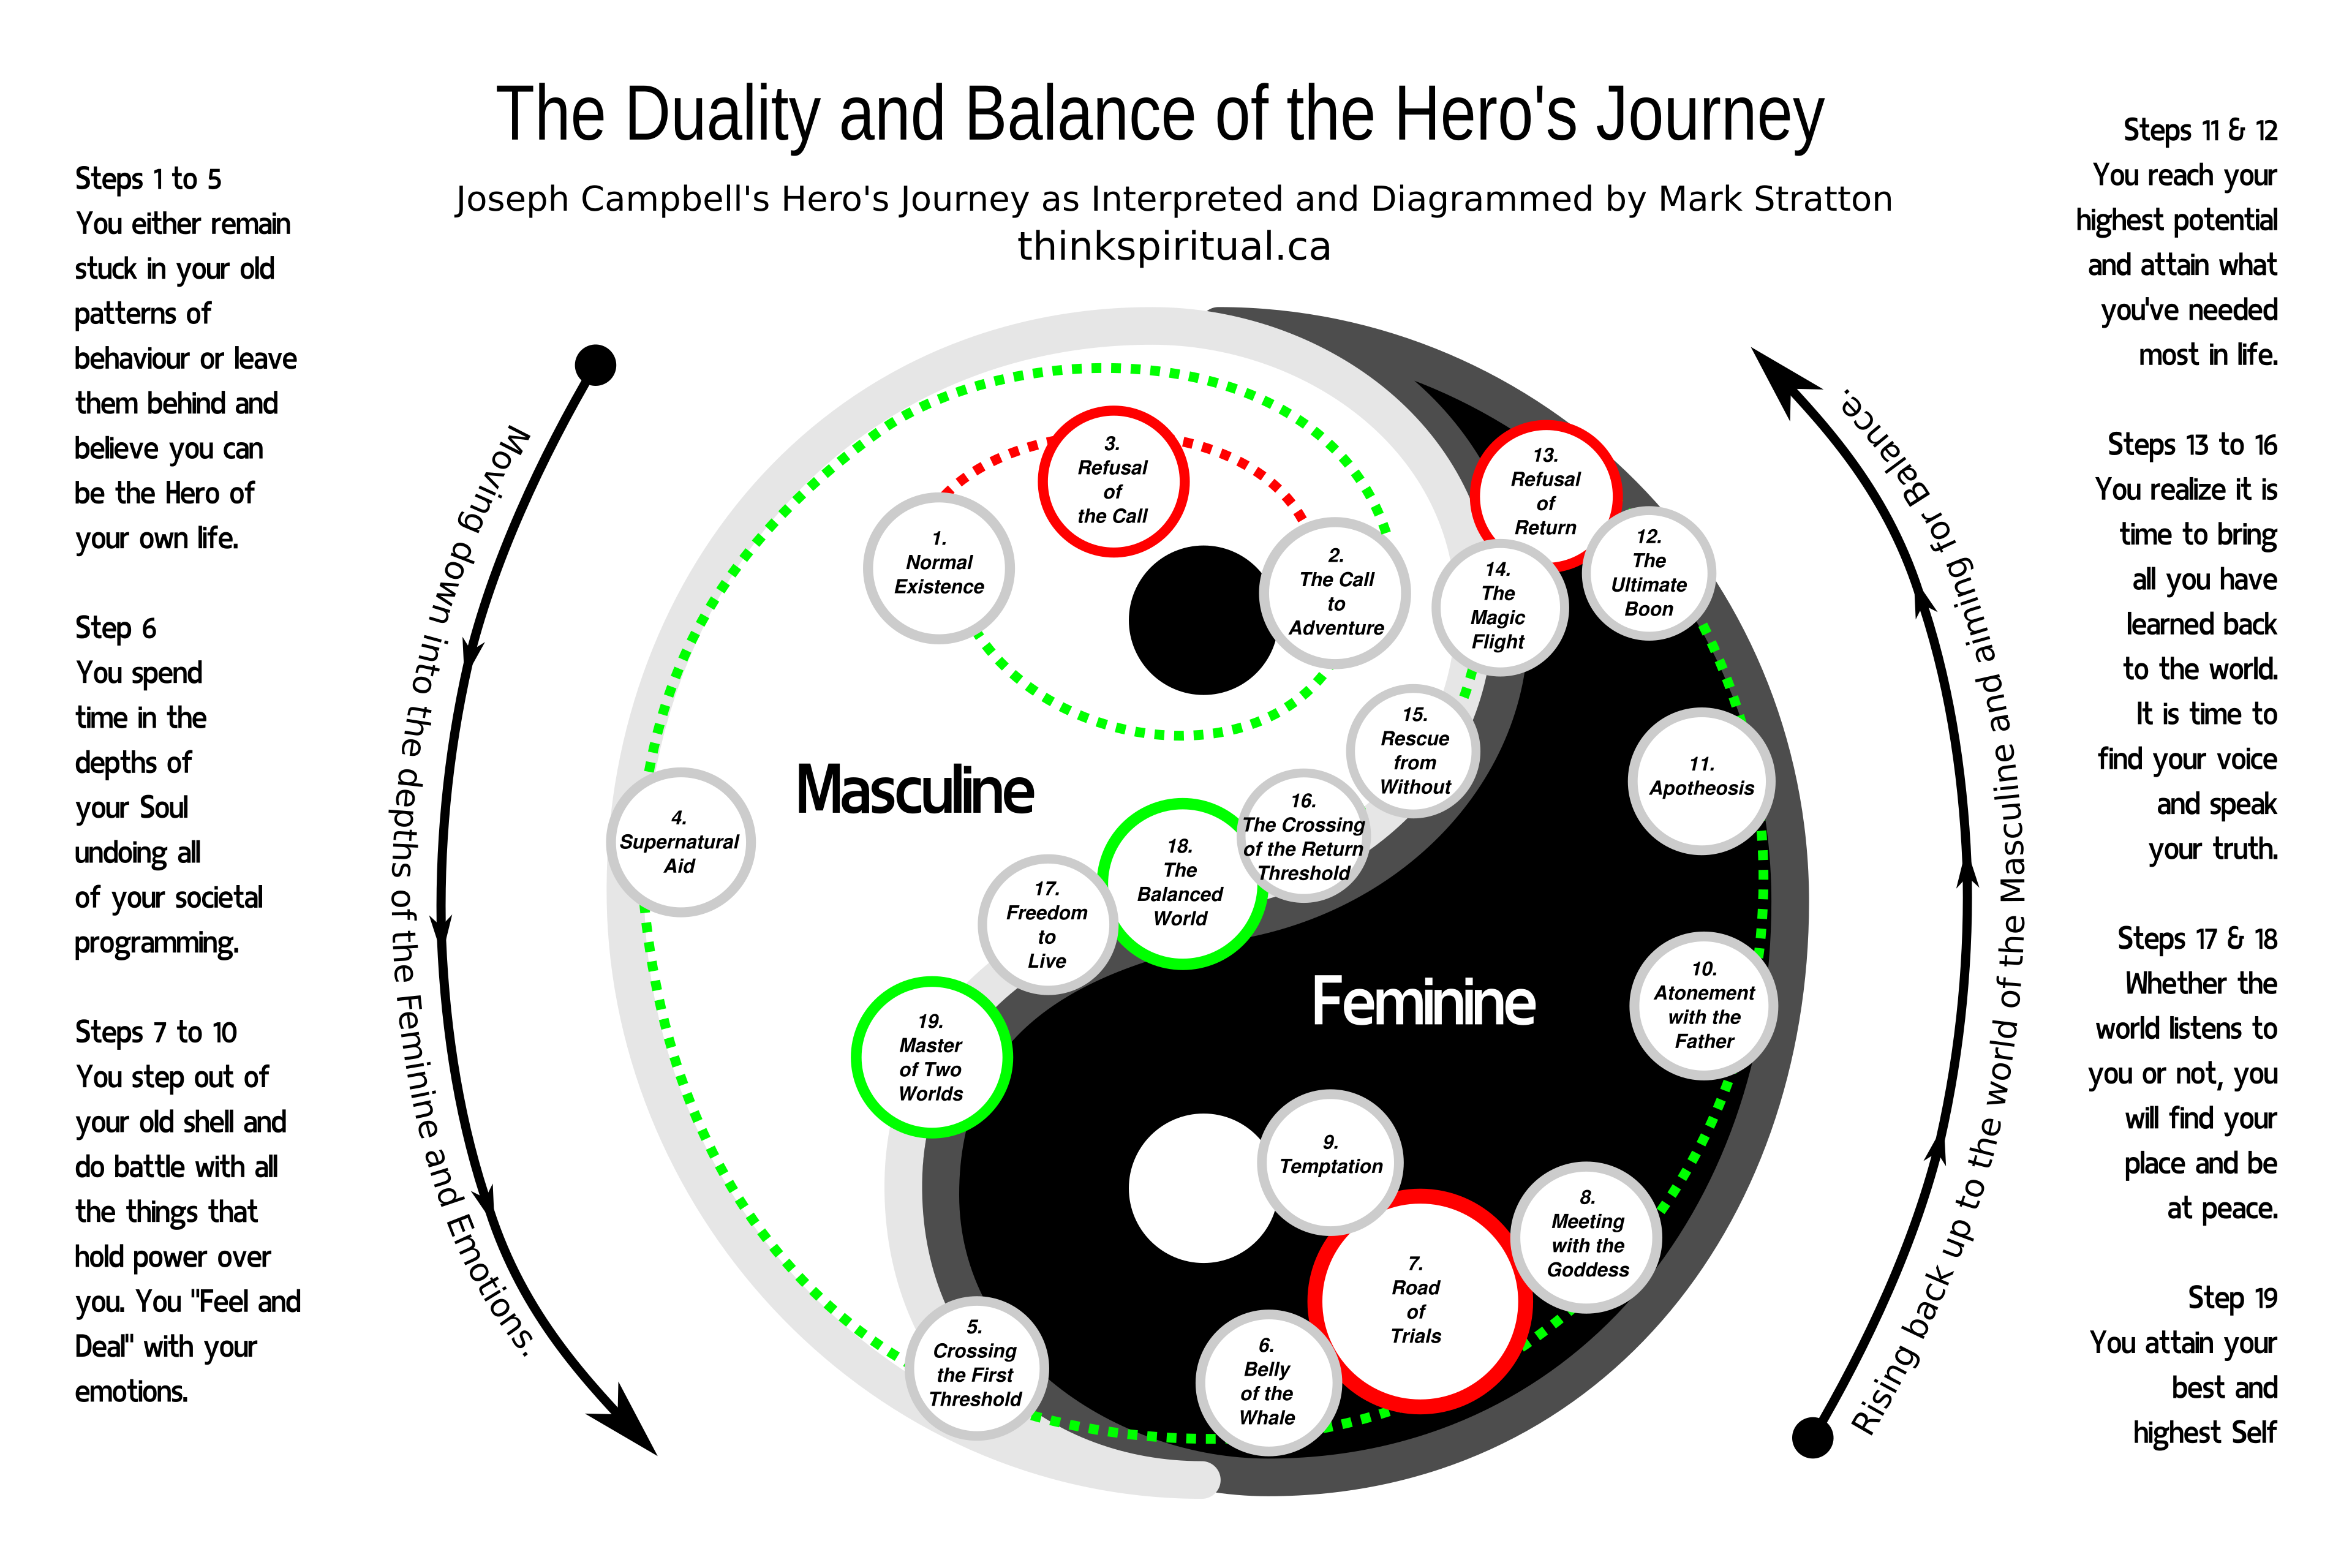 The Duality and Balance of the Hero's Journey